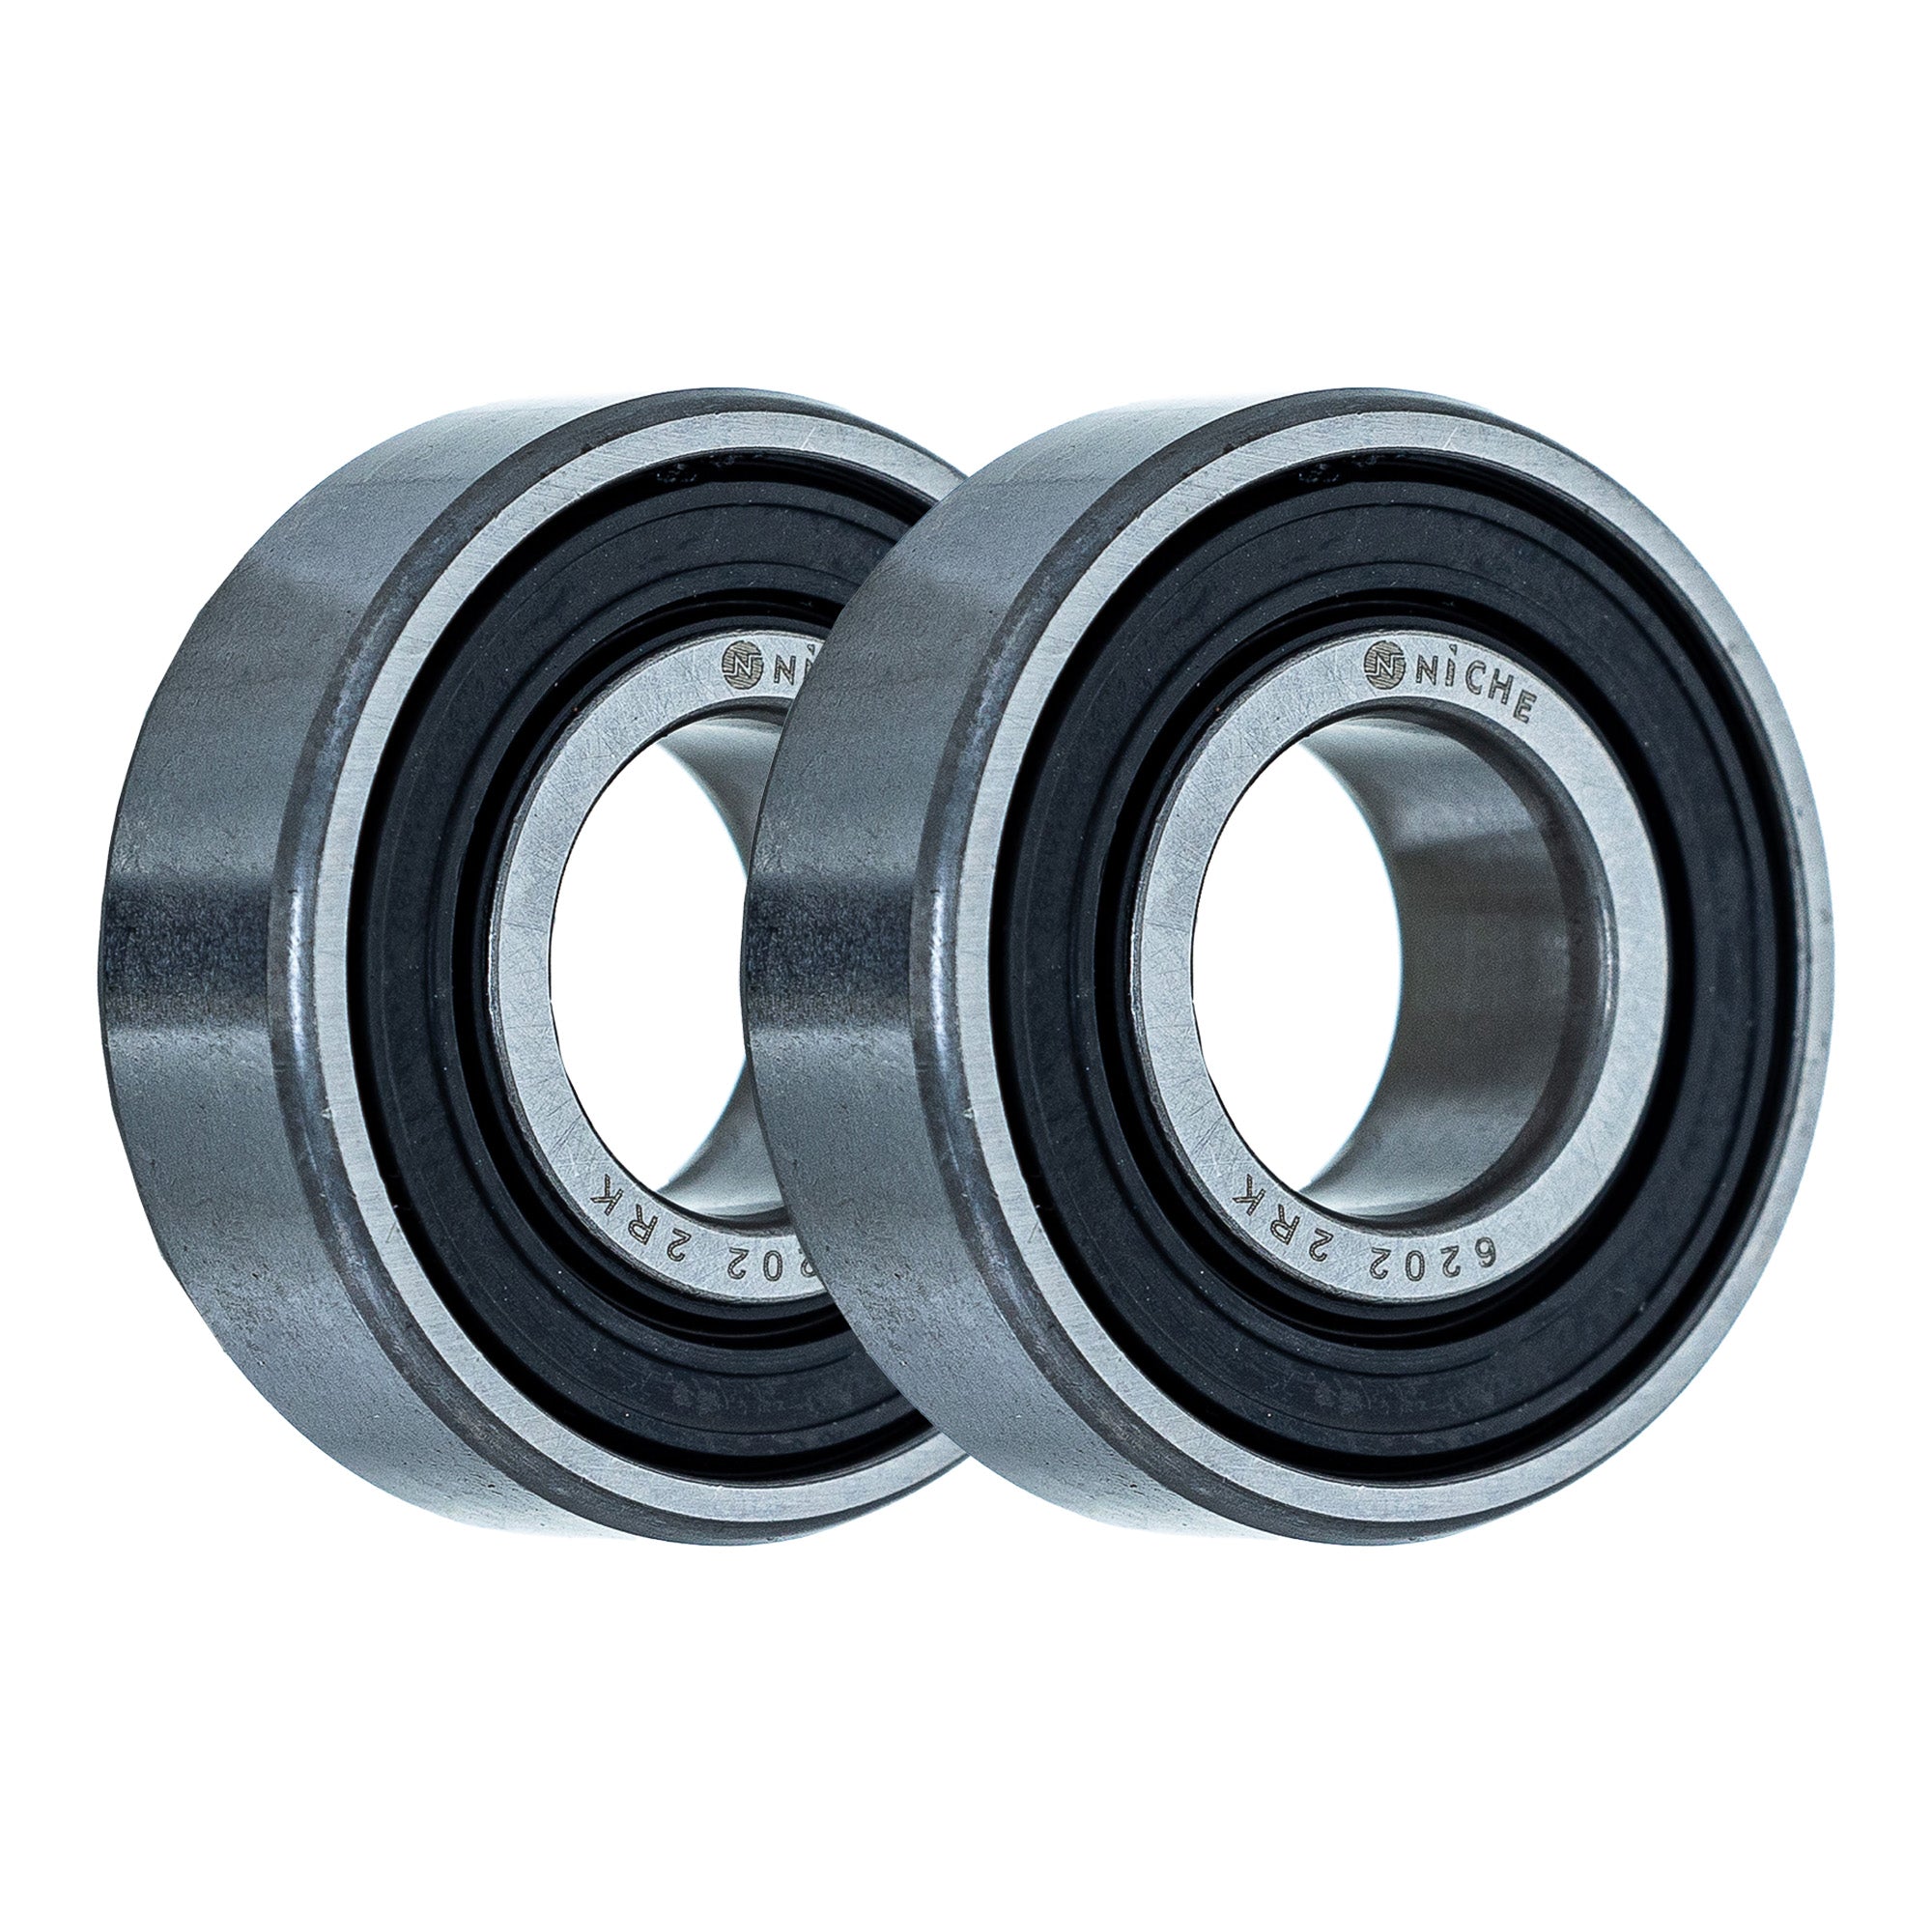 Electric Grade, Single Row, Deep Groove, Ball Bearing Pack of 2 2-Pack for zOTHER PW50 NICHE 519-CBB2298R